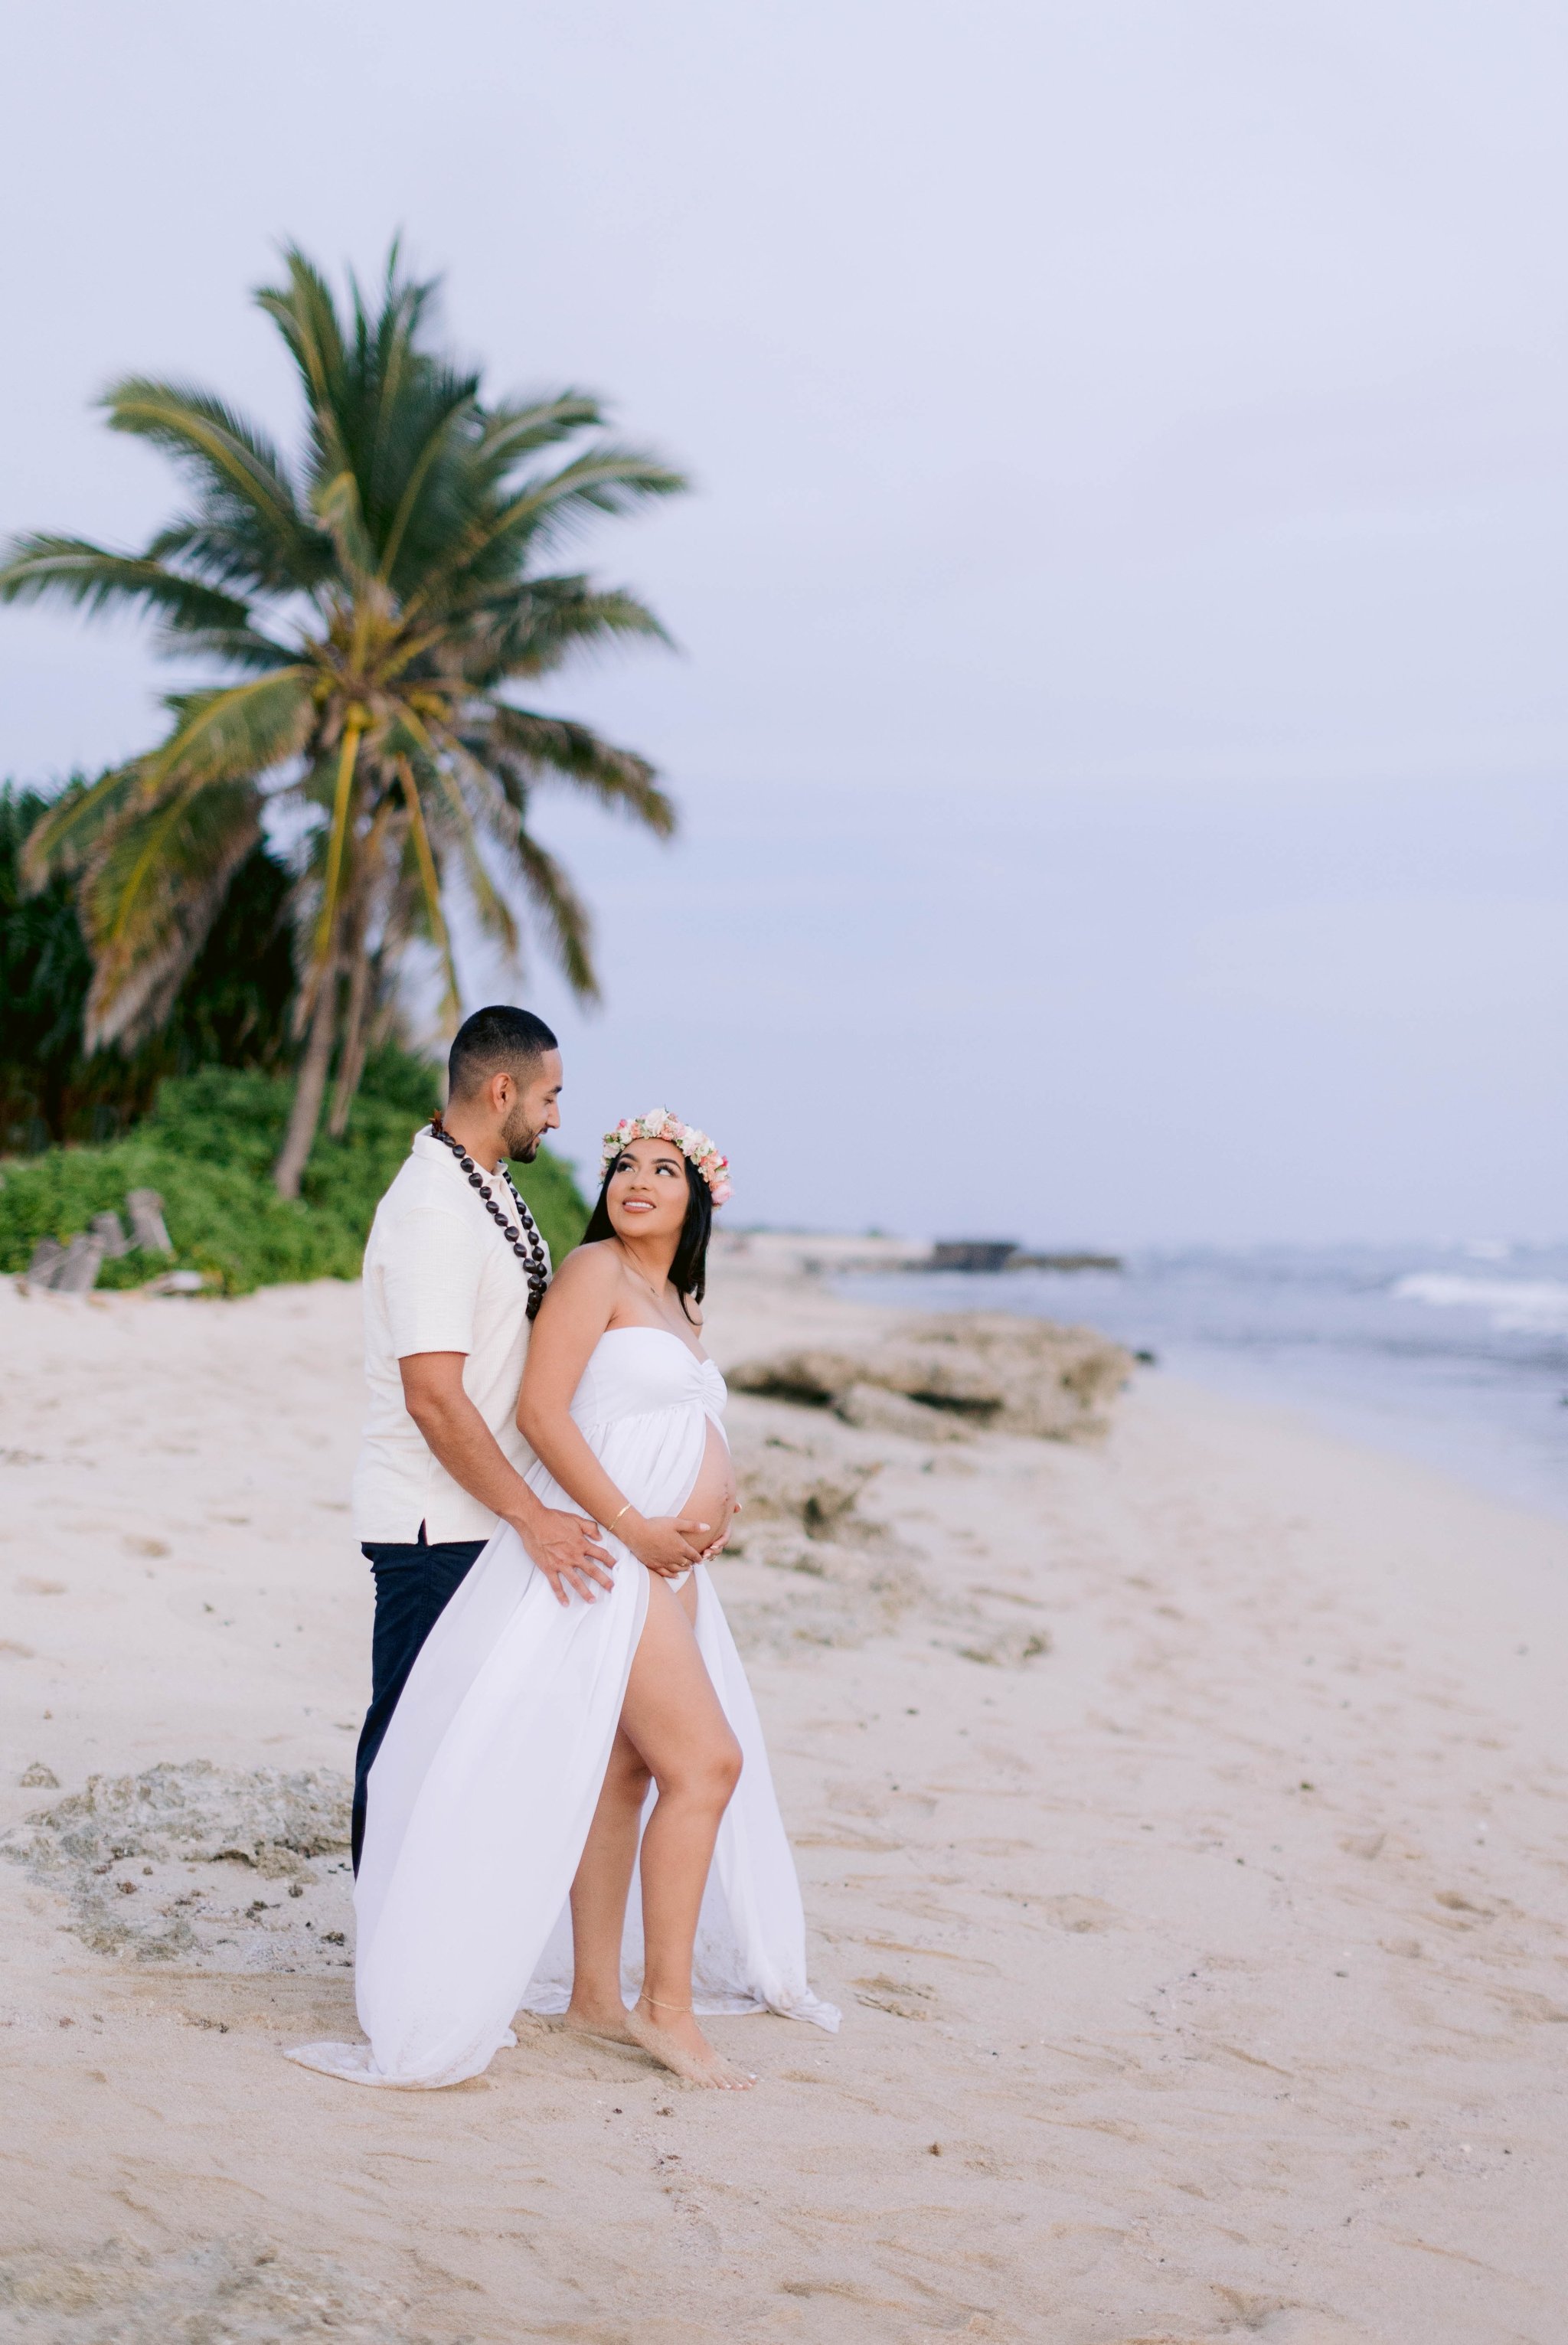 Romantic sunset maternity photography session at the beach - oahu family photographer